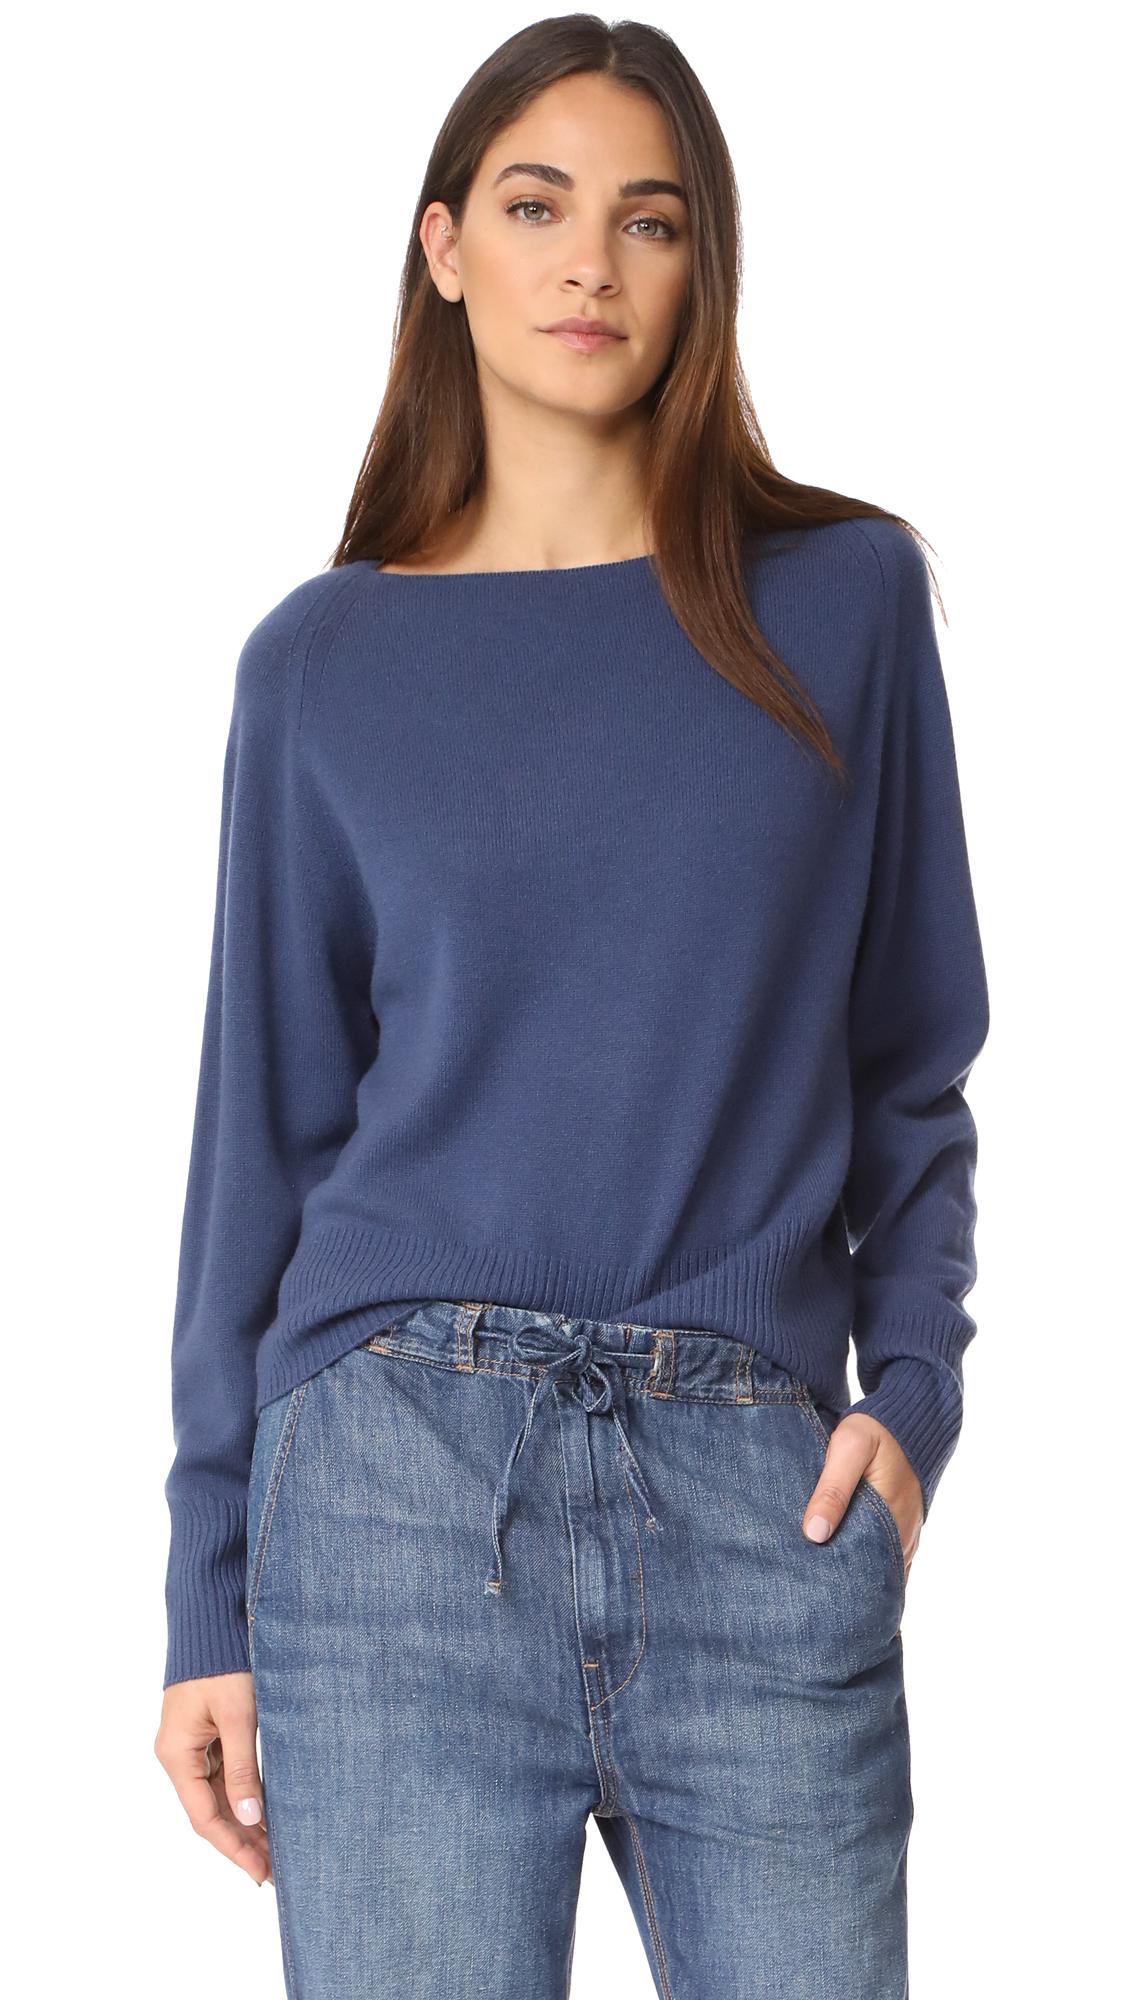 Vince Boat Neck Cashmere Pullover Sweater in Blue - Lyst